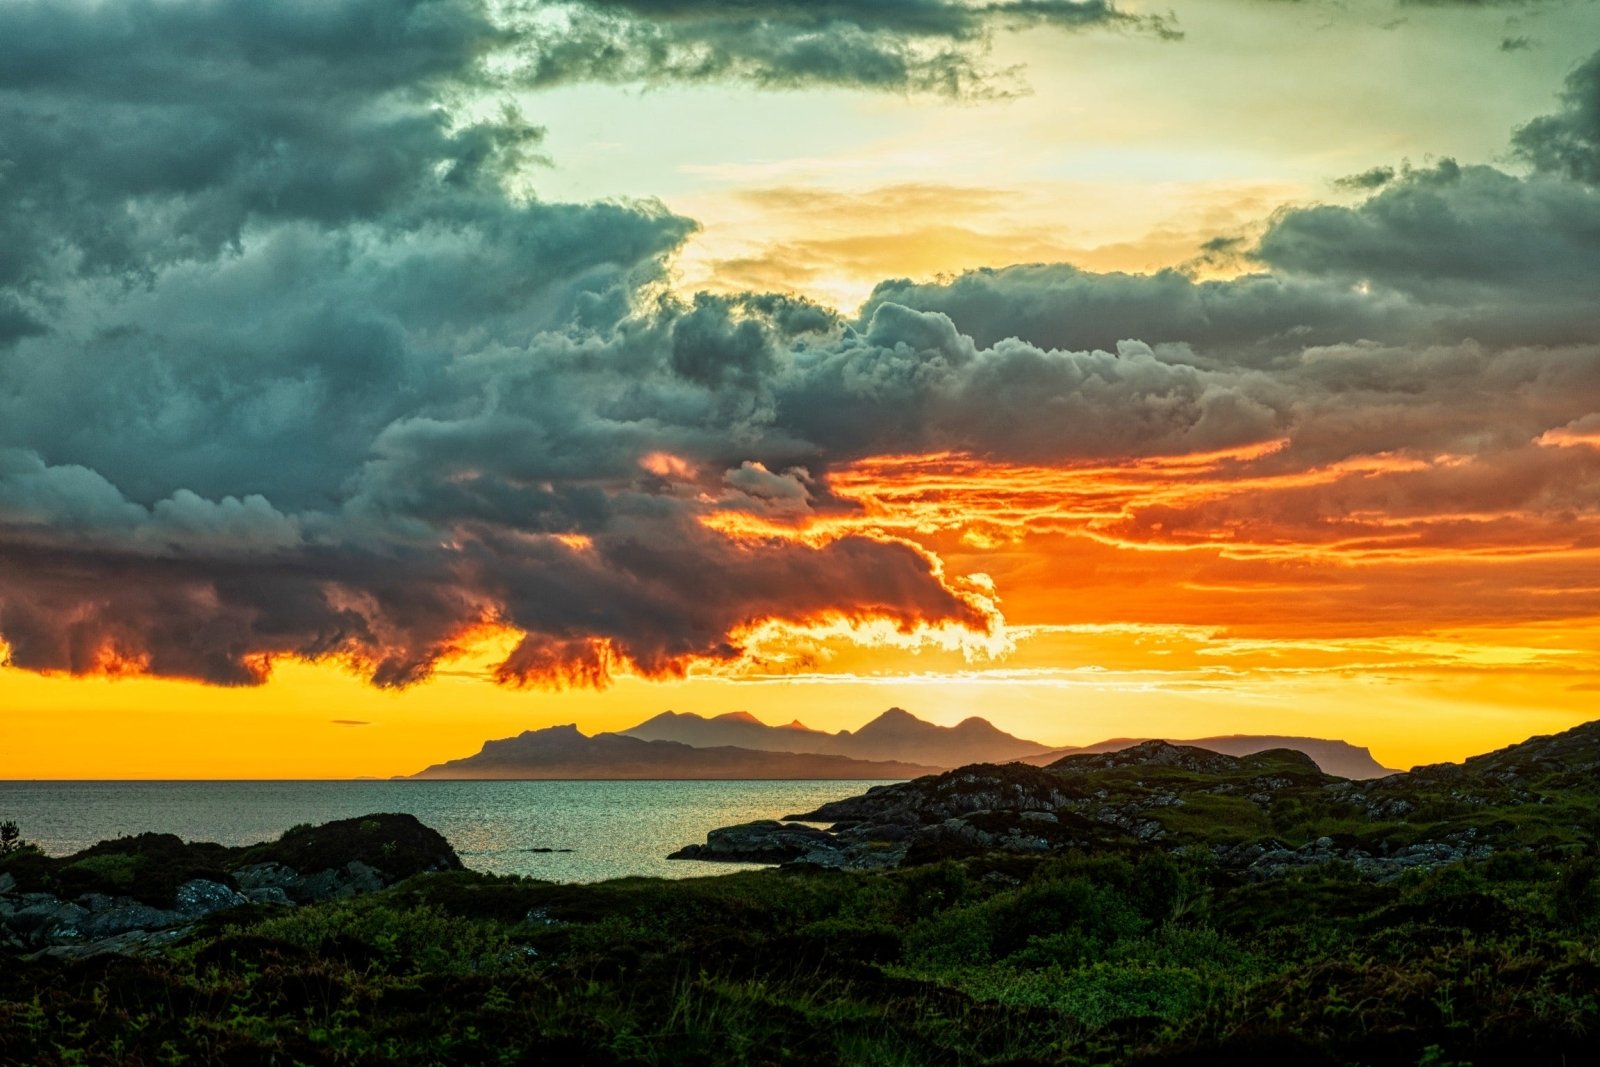 Cuillin Sunset From Ardtoe Scottish Landscape Photography-Scottish Landscape Photography-Skye Art Gallery-Paintings, Prints, Homeware, Art Gifts From Scotland By Scottish Artist Kevin Hunter